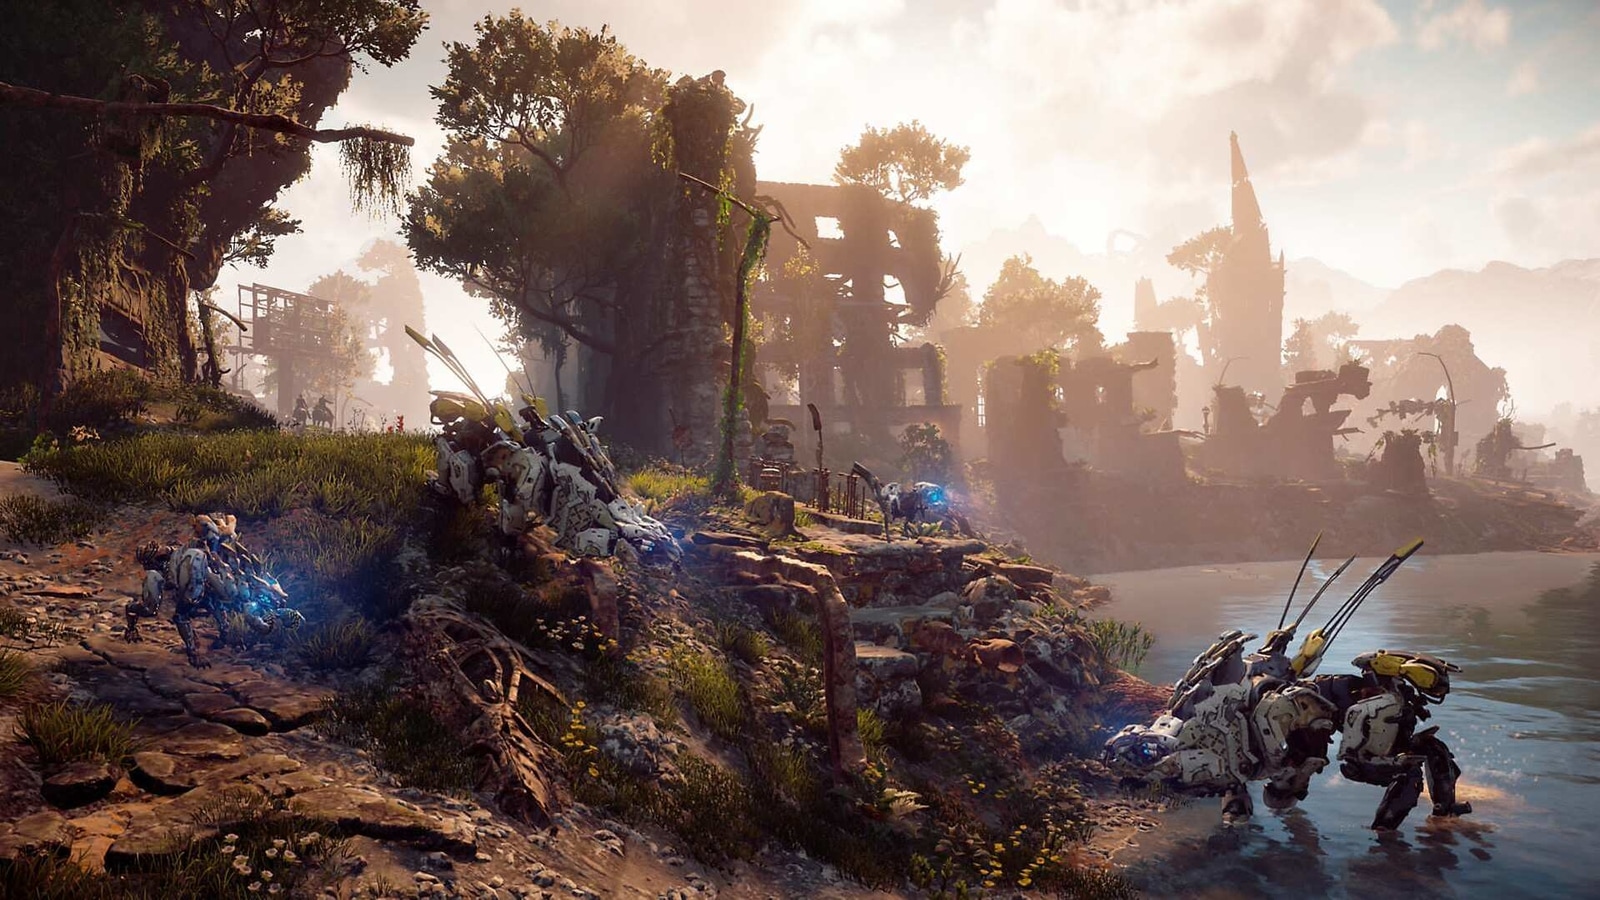 Horizon Zero Dawn goes from being a PS4 exclusive to a best-seller on Steam